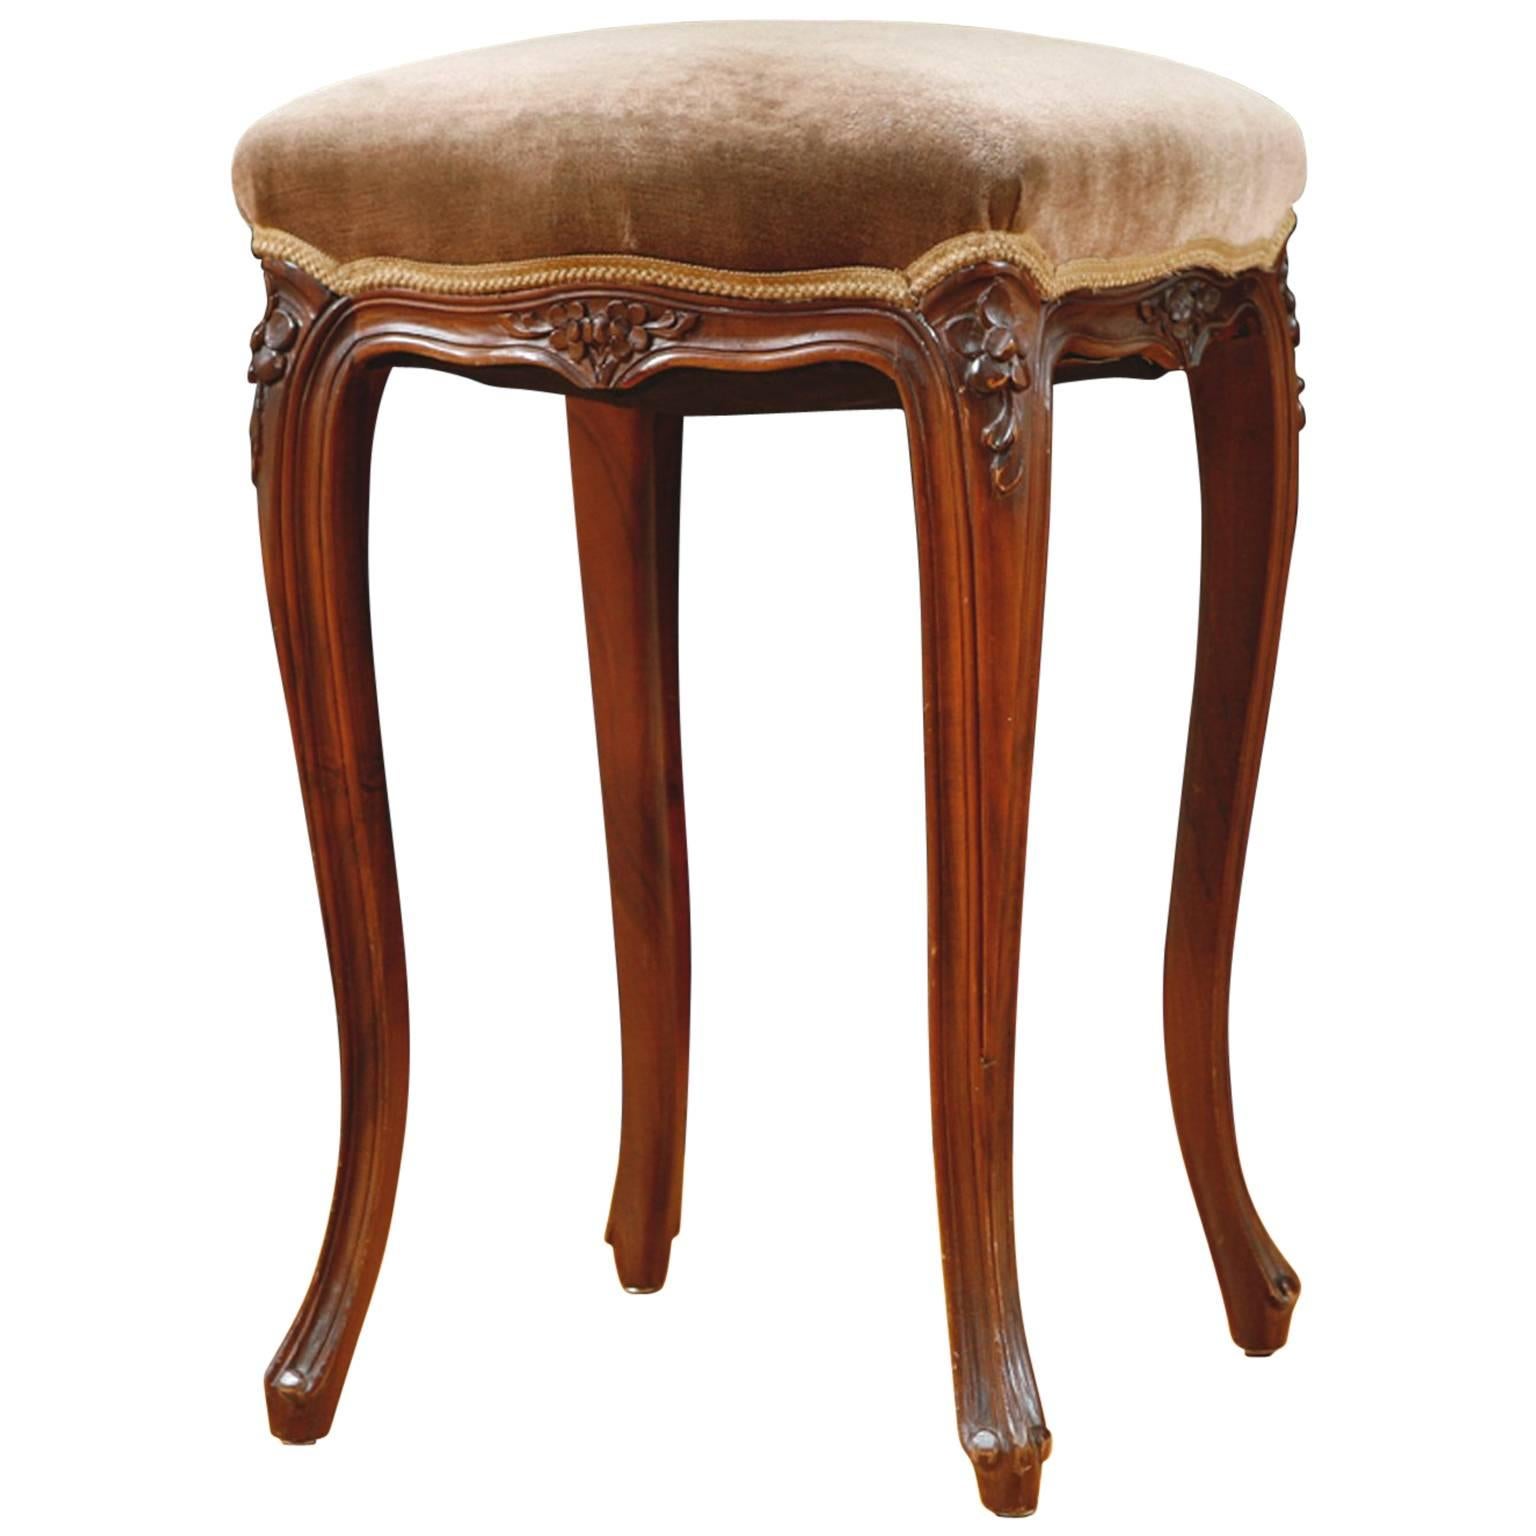 French Louis XV-Style Square Stool in Walnut with Upholstered Seat, circa 1900